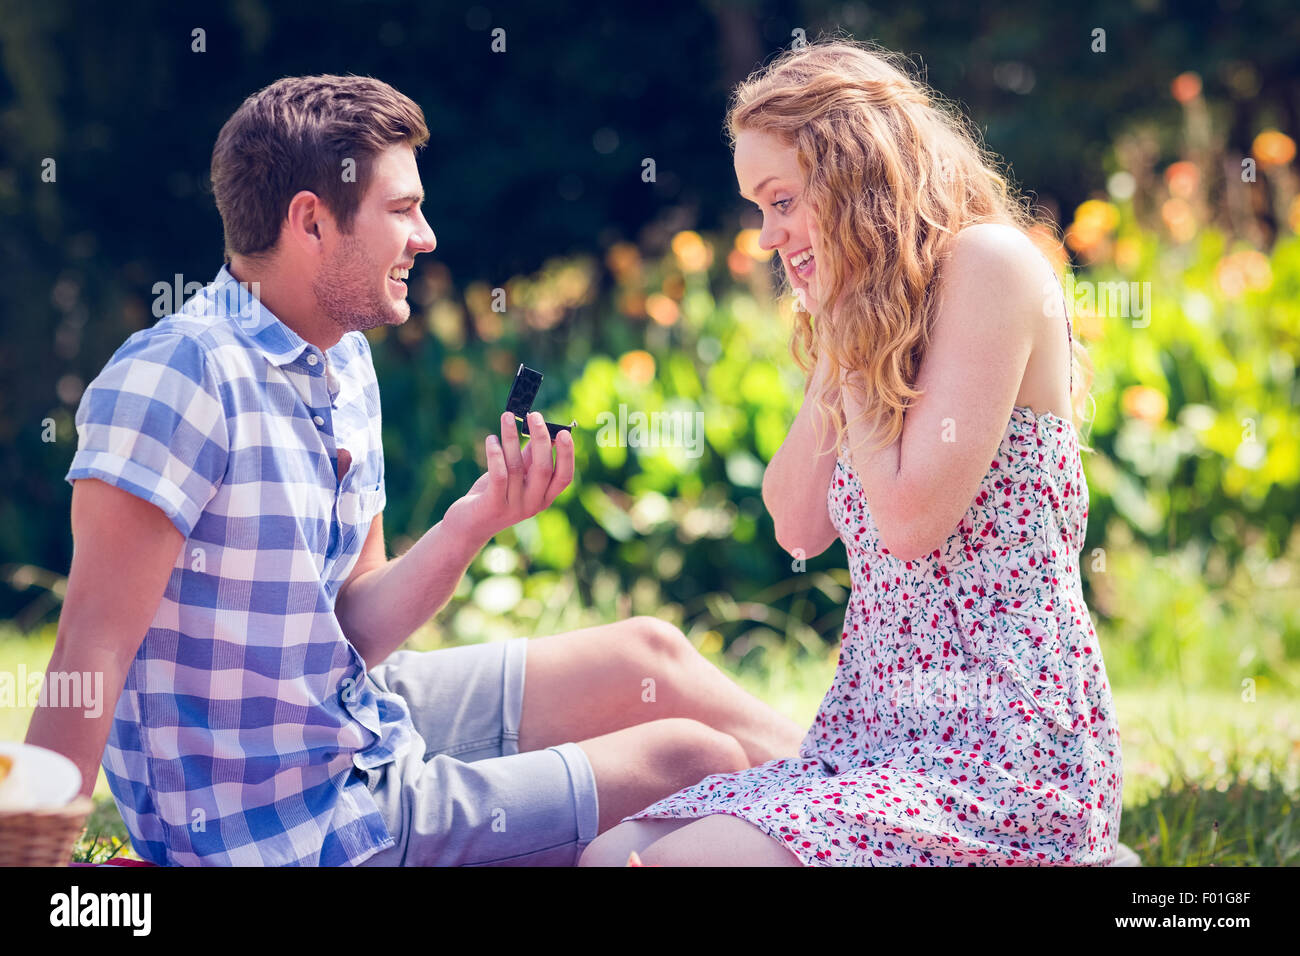 Handsome man doing marriage proposal to his girlfriend Stock Photo